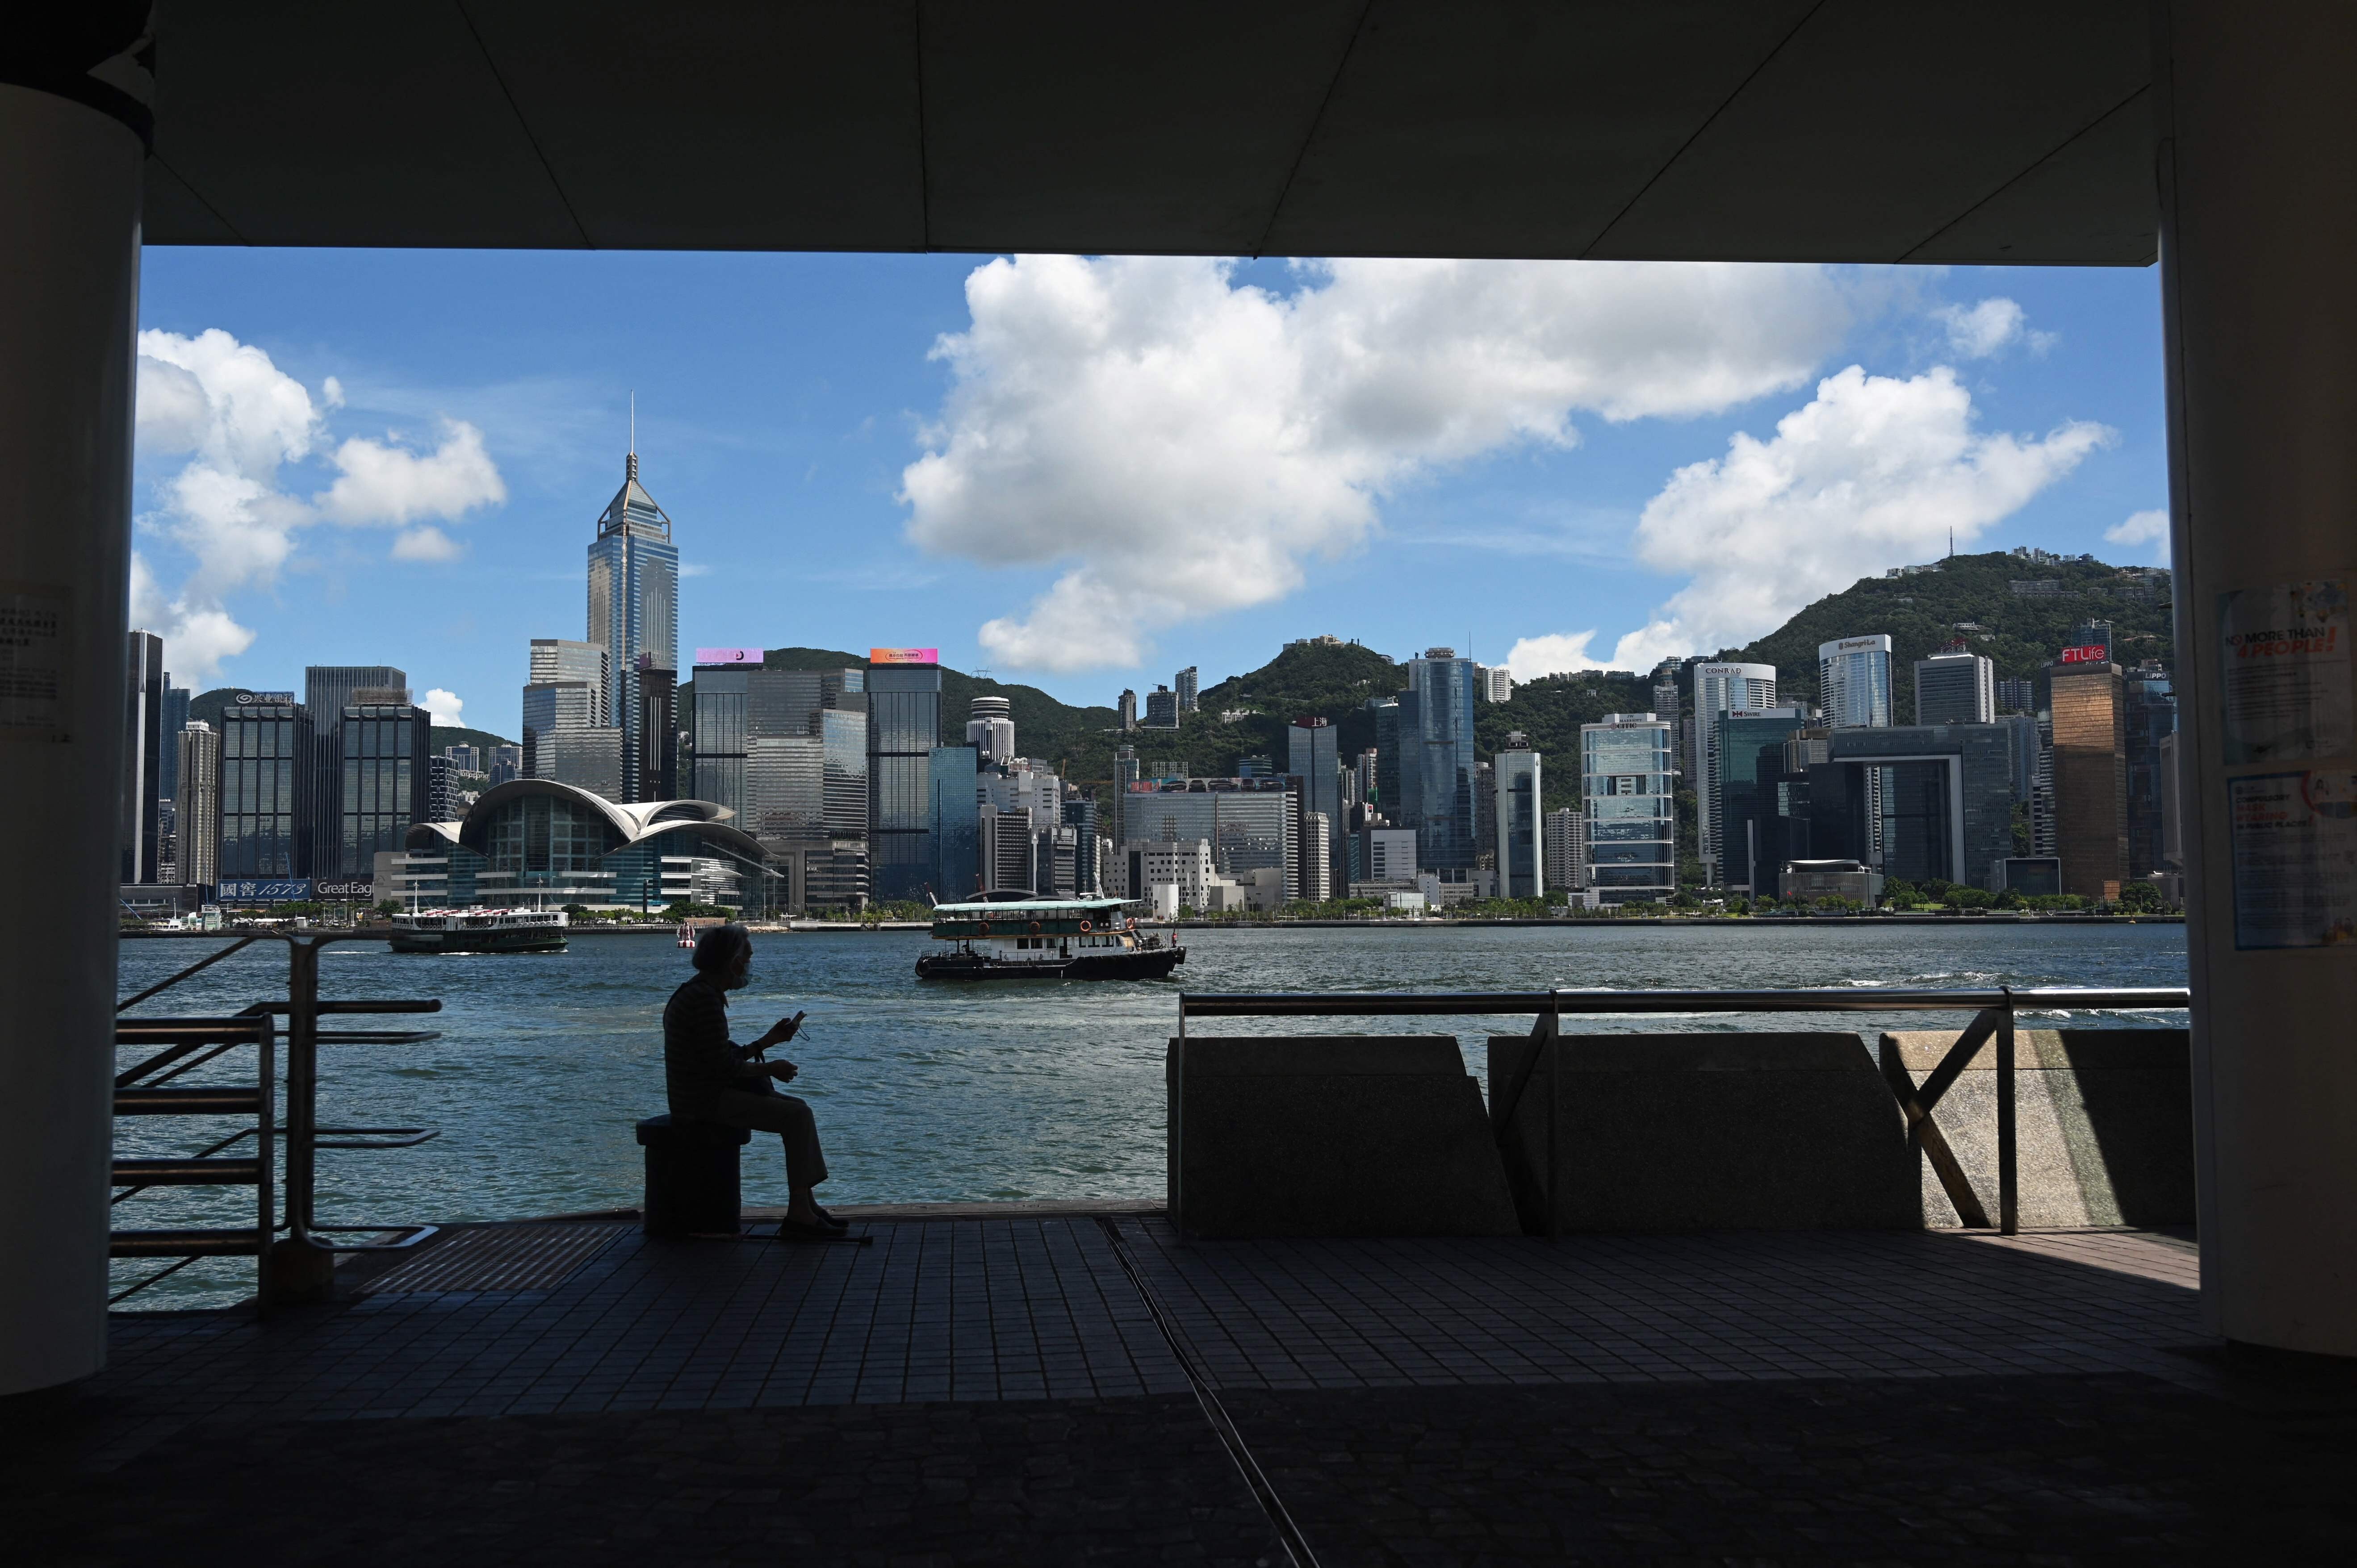 Hong Kong’s developers have been actively donating land for transitional housing and have joined the private-public participation land scheme, which suggests that the rules of the game have already changed, according to one analyst. Photo: AFP)